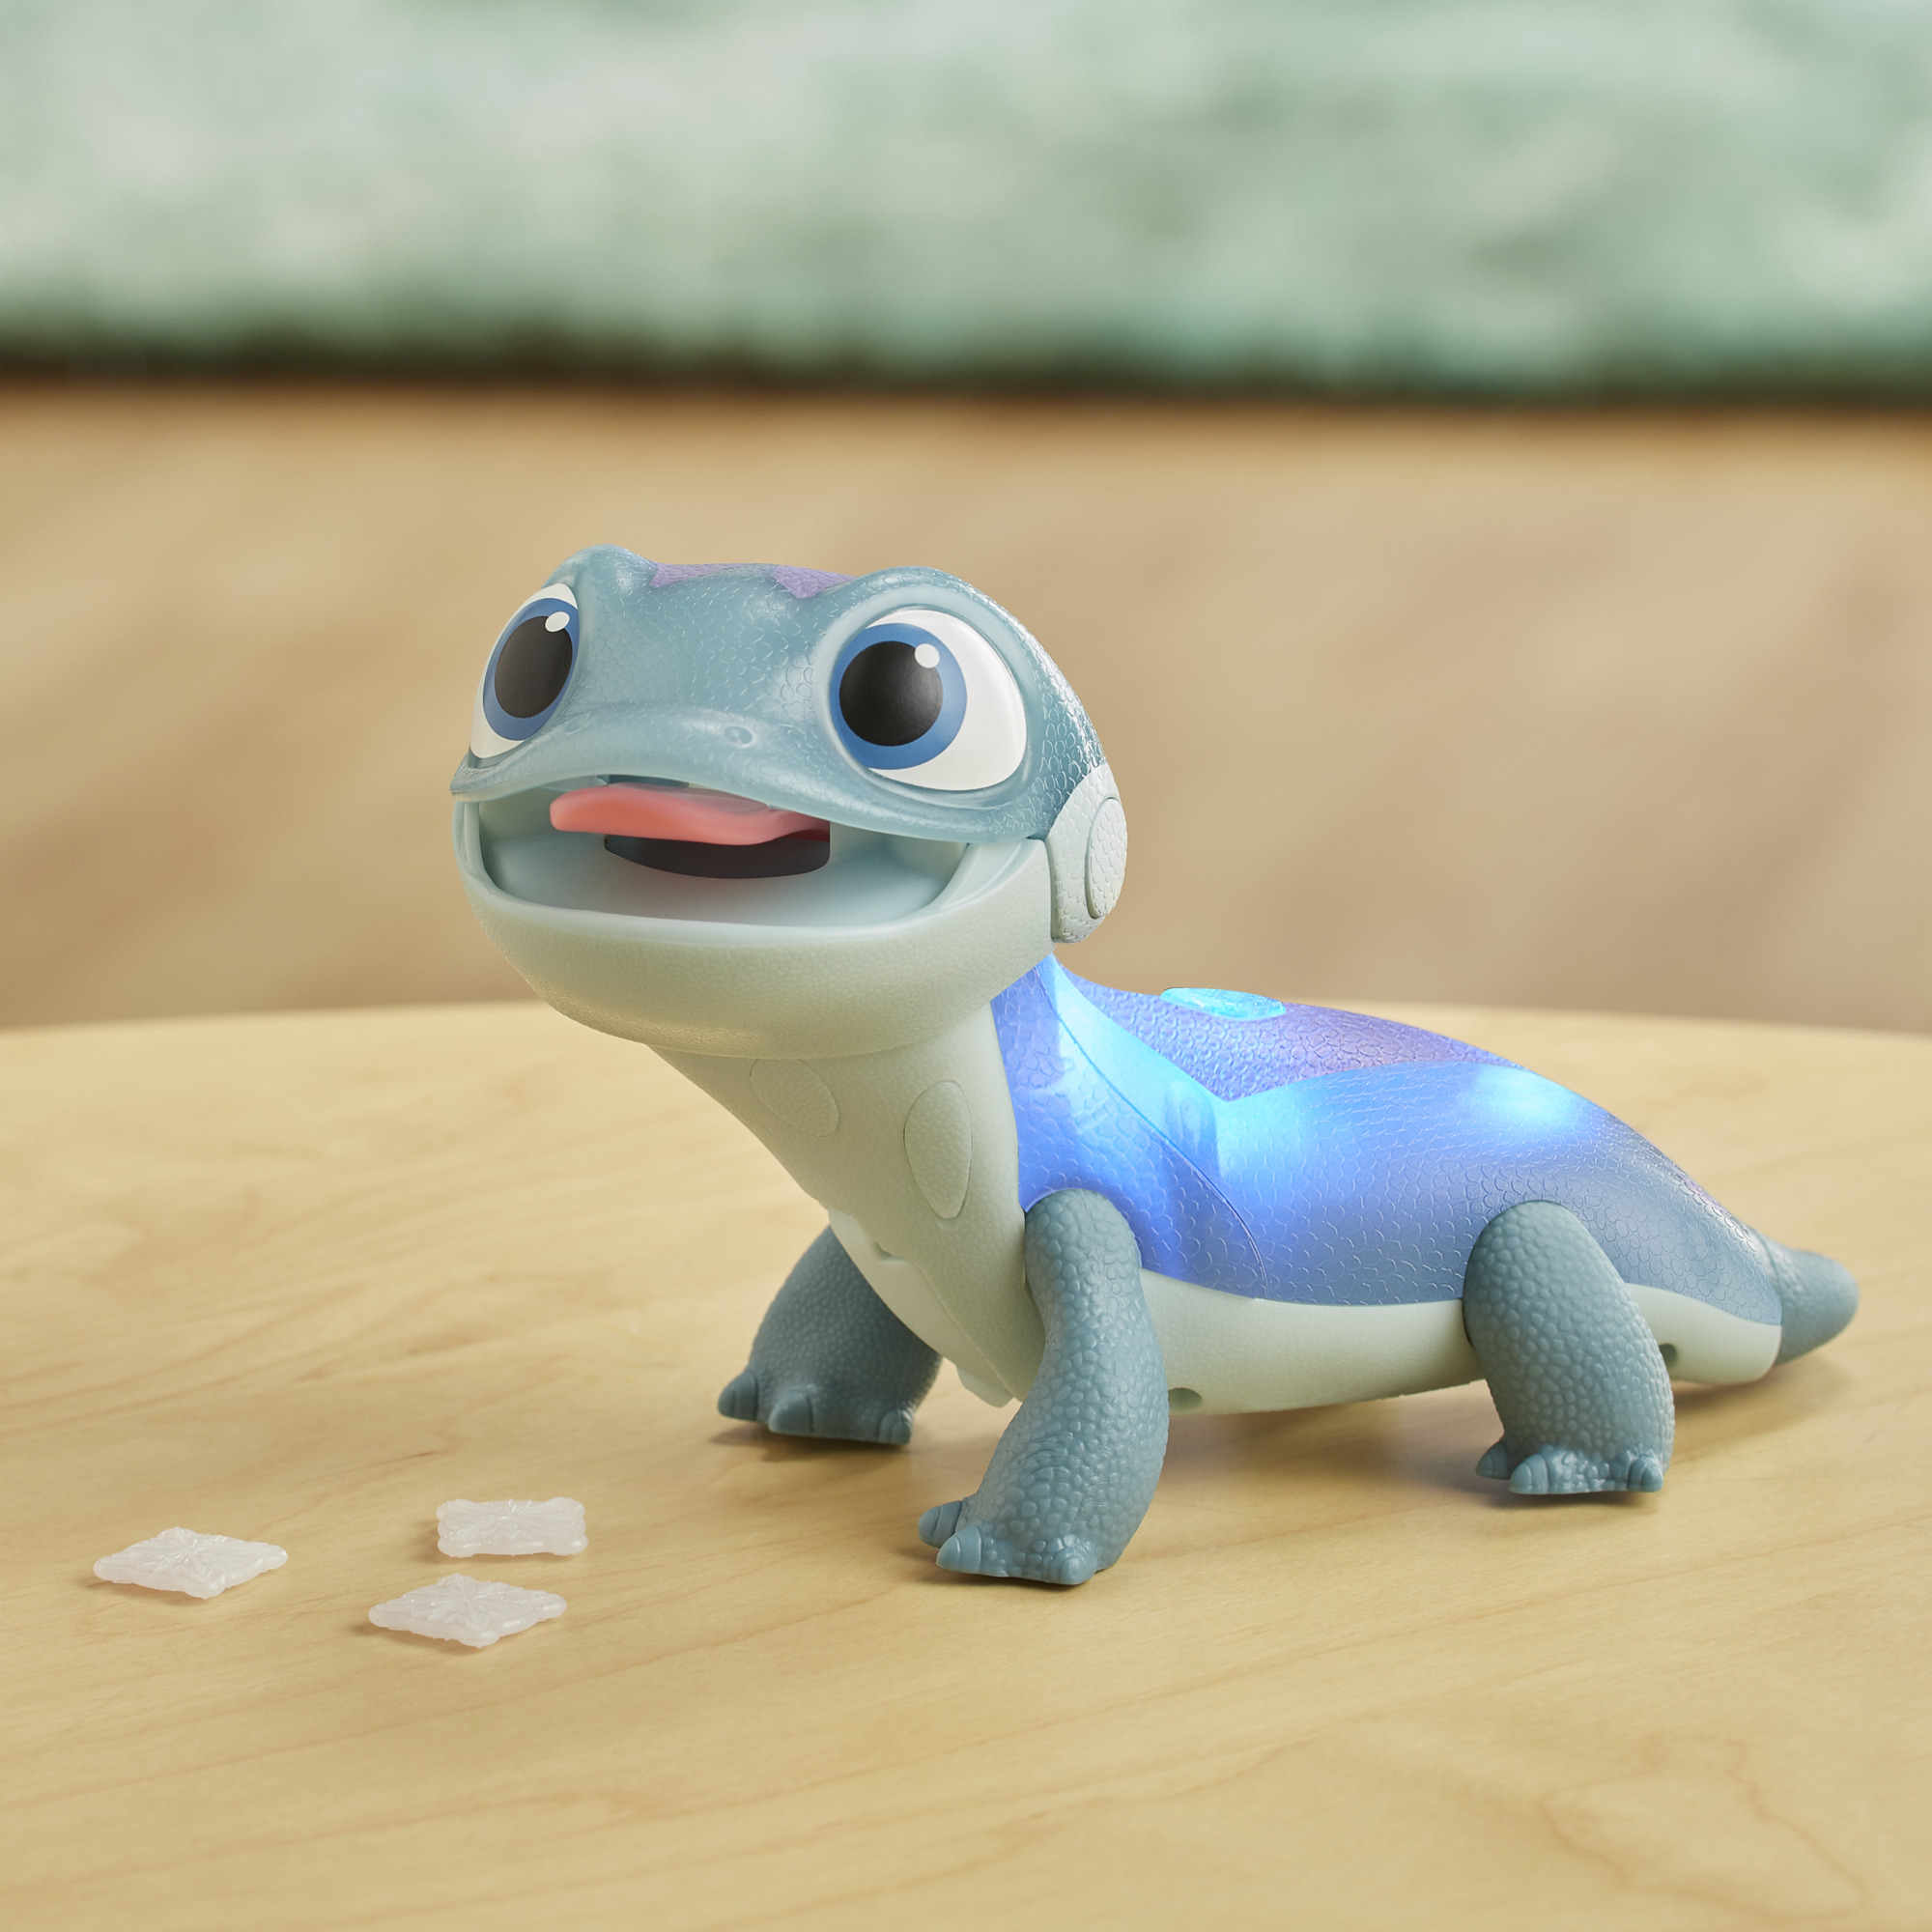 Disney Frozen 2 Fire Spirit's Snowy Snack, Salamander Toy with Lights - image 4 of 9